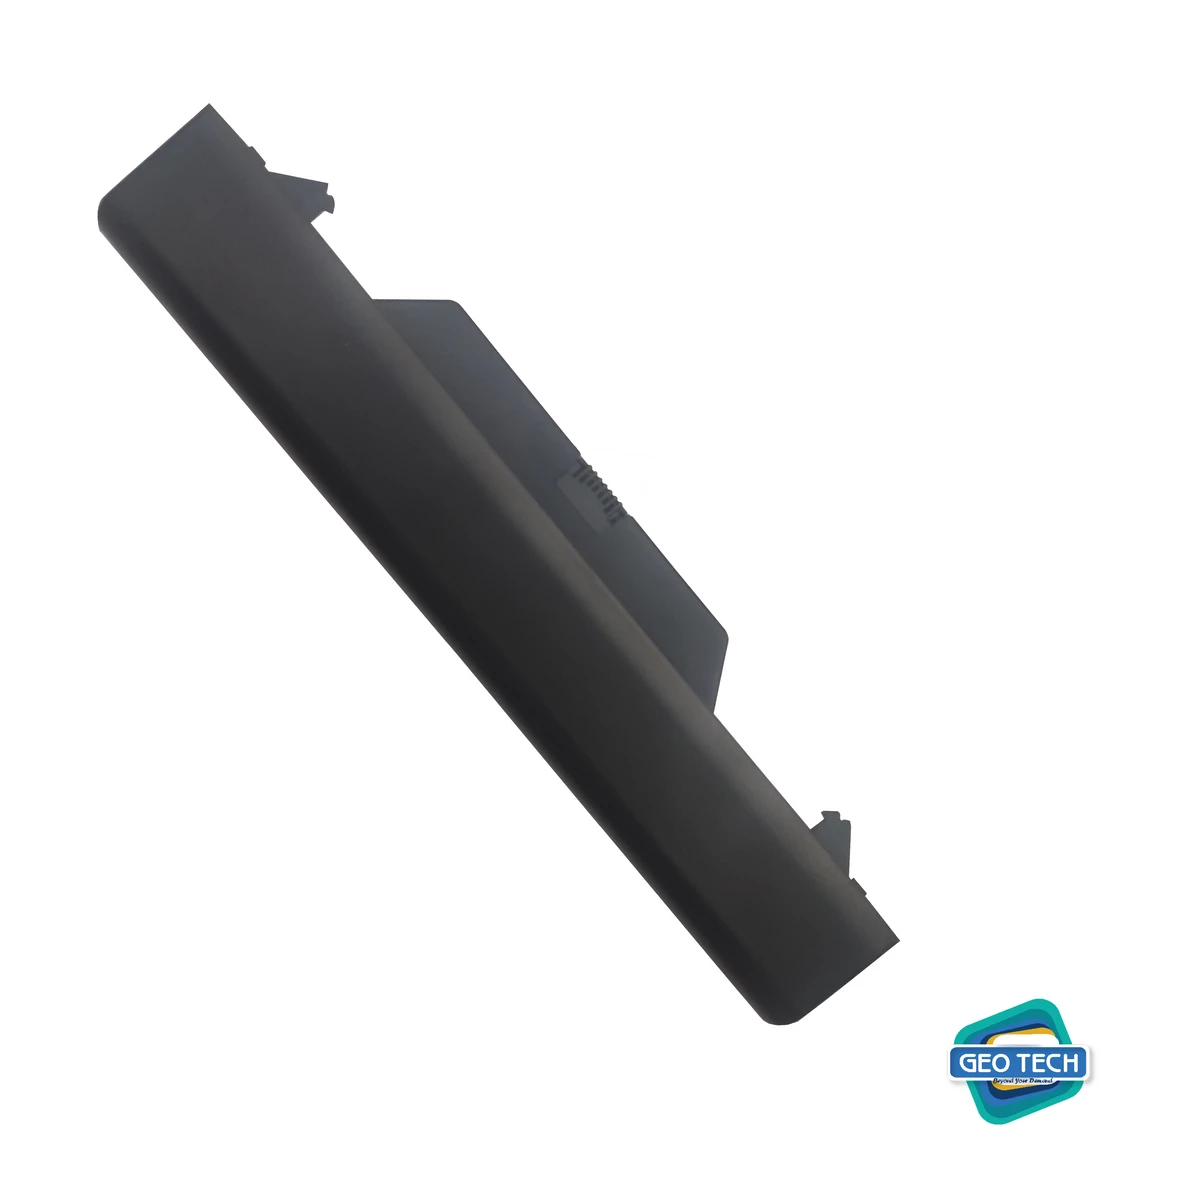 Laptop Battery For HP ProBook 4510s 4515s 4710s